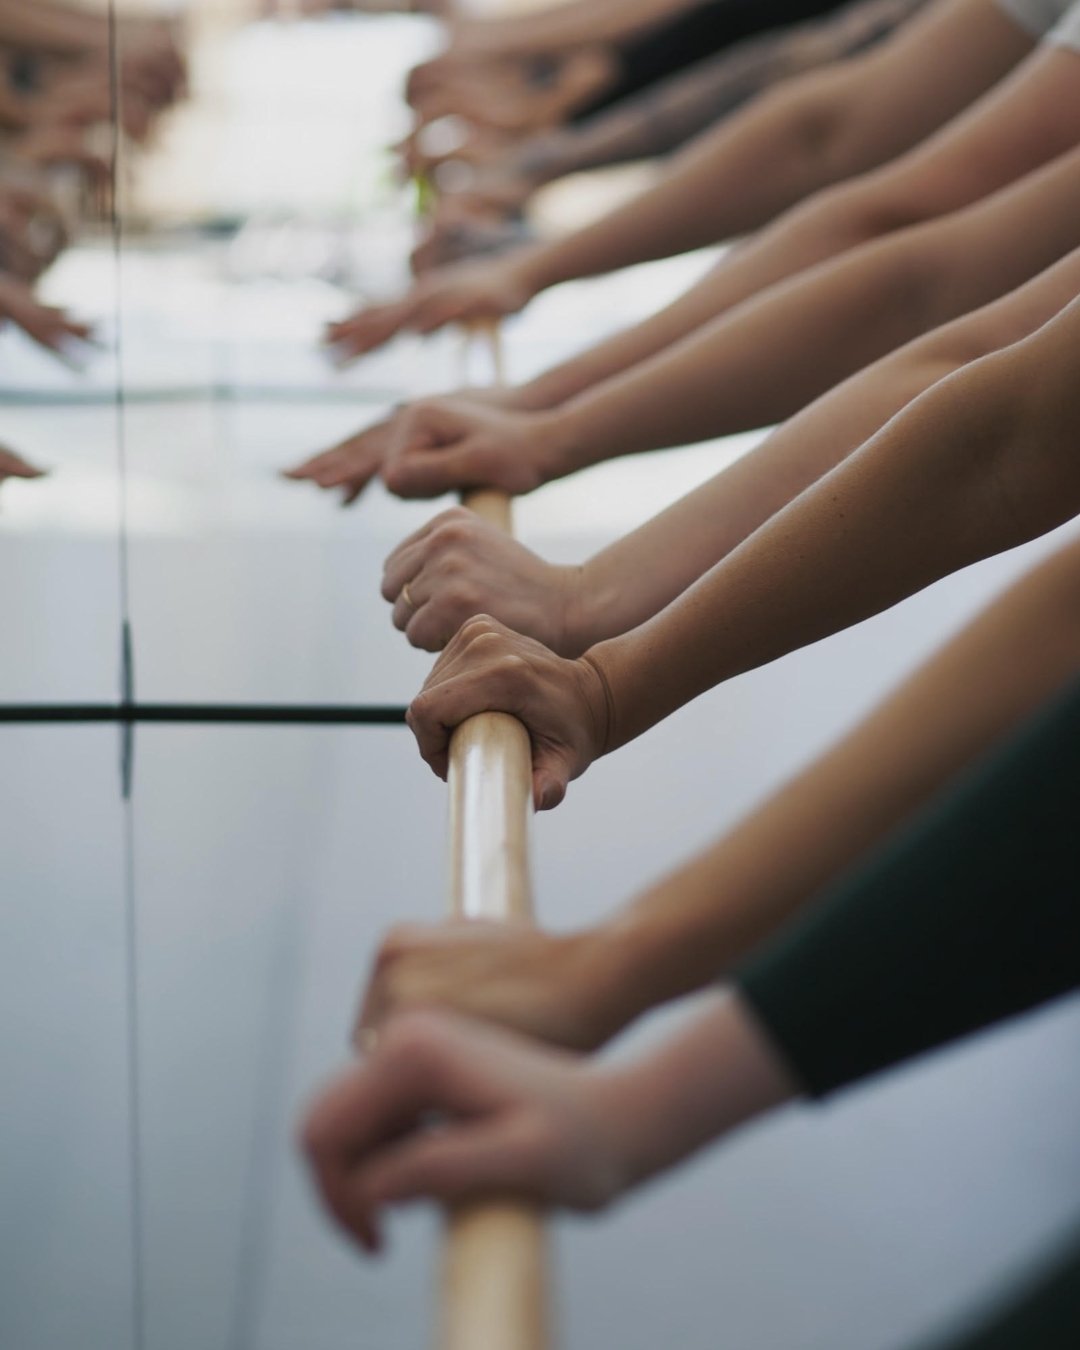 Barre workouts were initially developed by Lotte Berk, a German dancer, in the 1950s. She combined ballet barre exercises with rehabilitative therapy to create a unique fitness routine. Her method laid the groundwork for the development of barre work